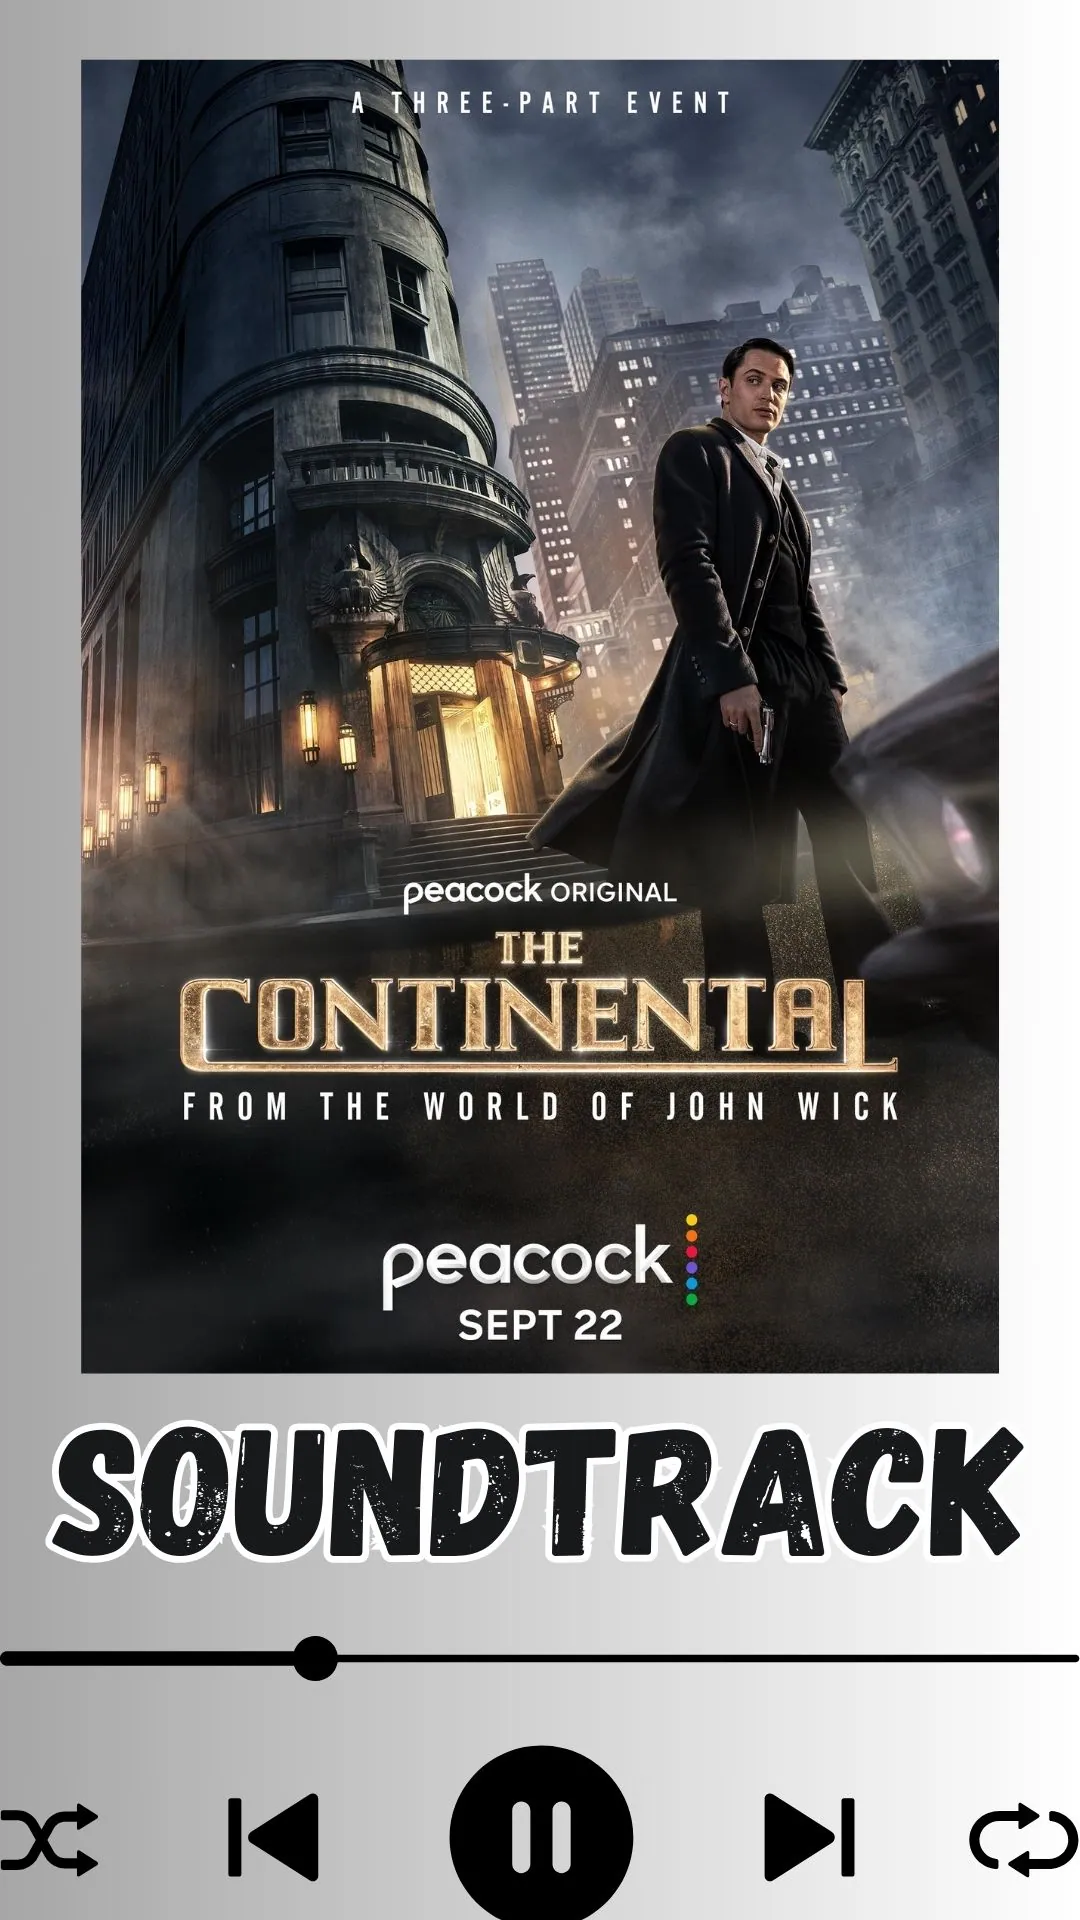 The Continental: From the World of John Wick episode 2: Release